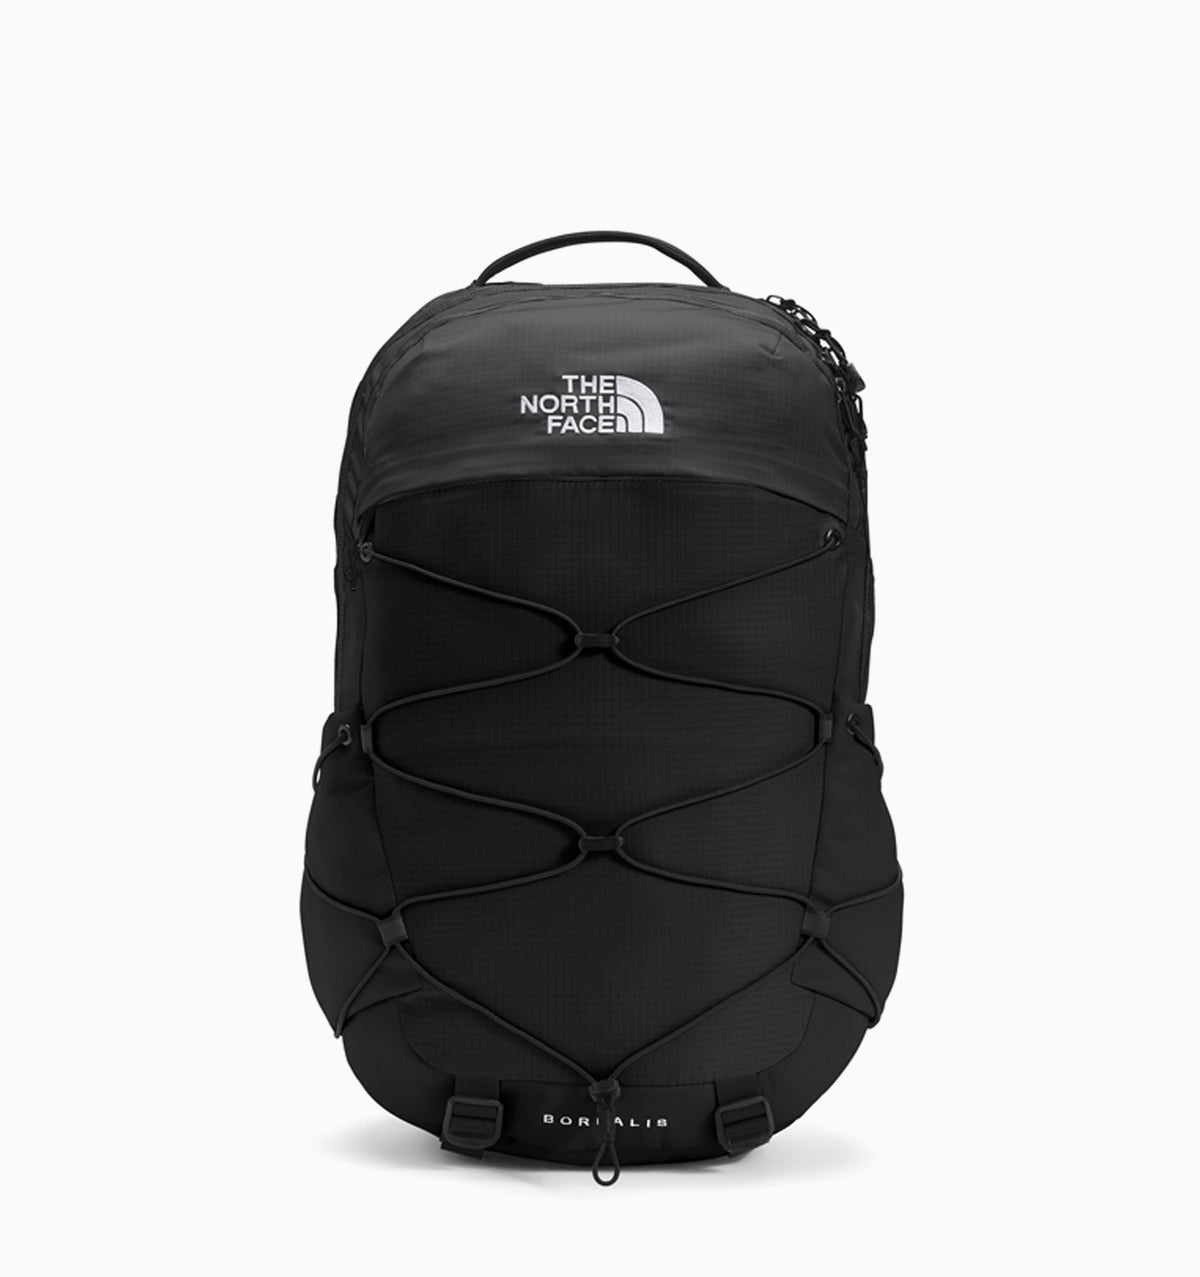 The North Face 16" Borealis Laptop Backpack 28L - Black